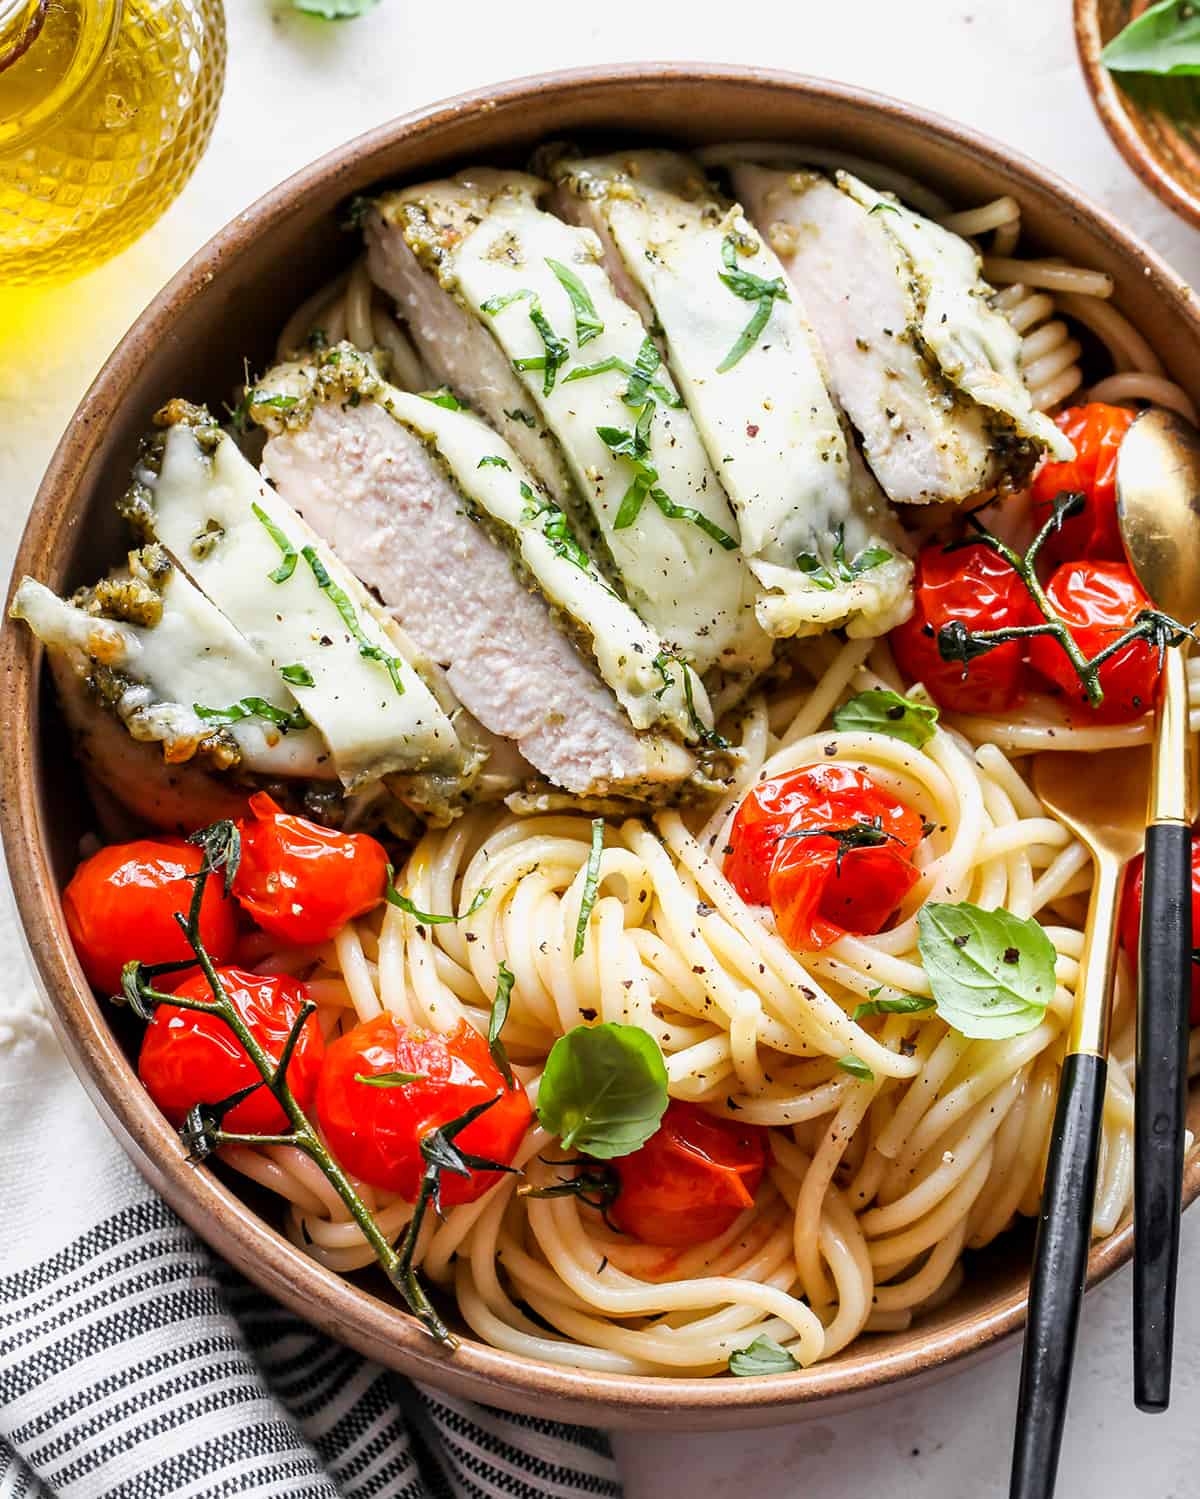 Baked pesto chicken cut into slices over pasta with red tomatoes